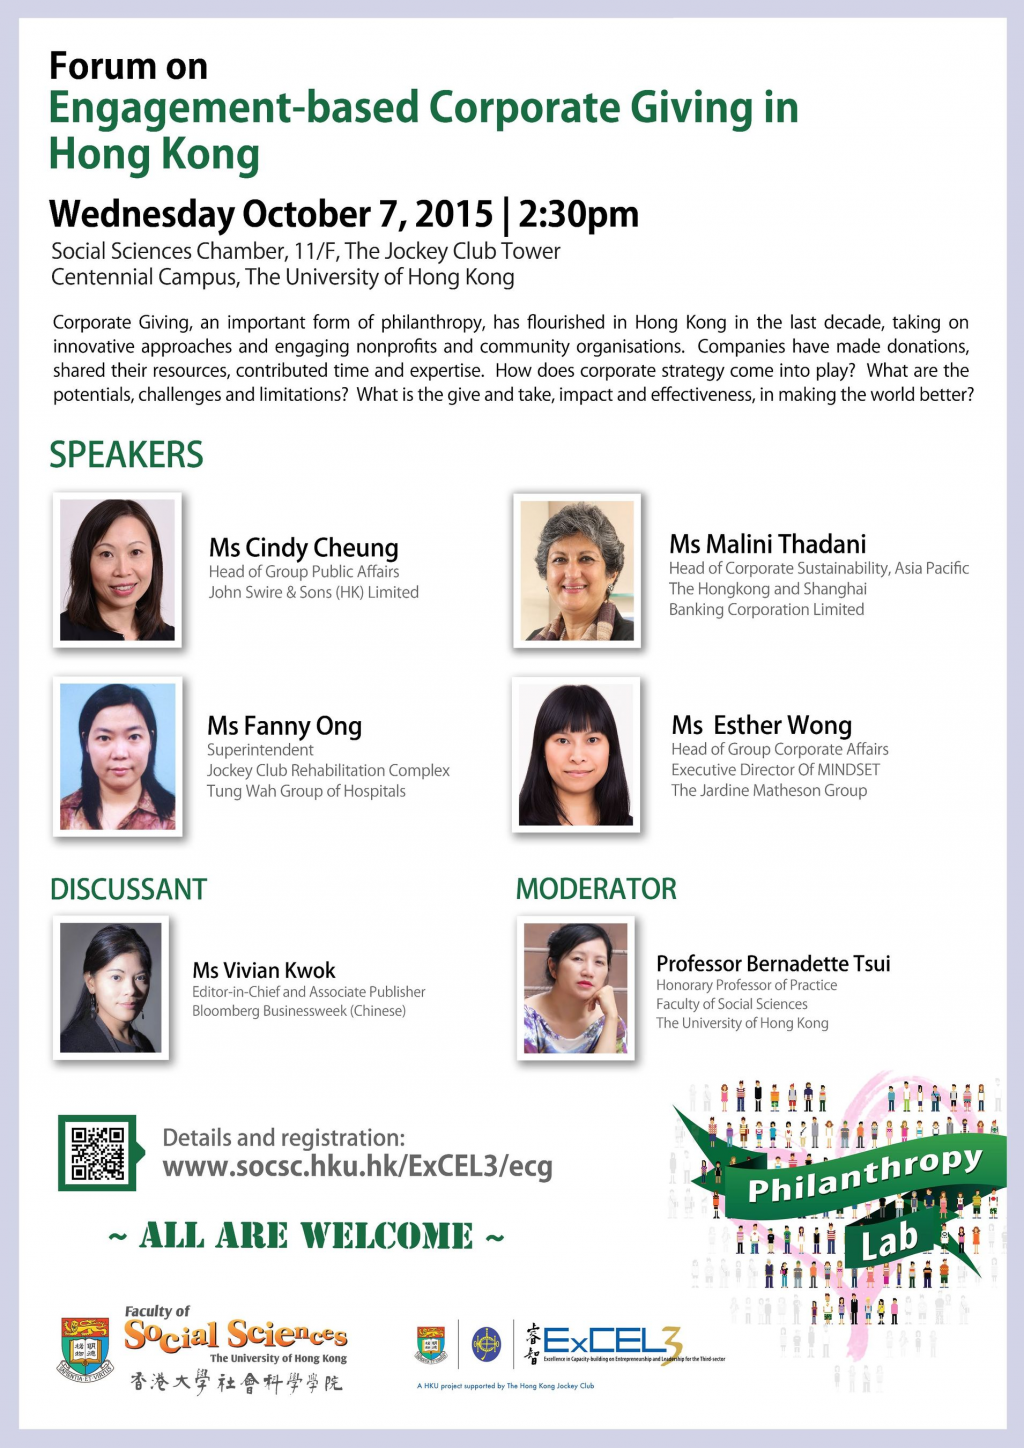 Forum on Engagement-based Corporate Giving in Hong Kong